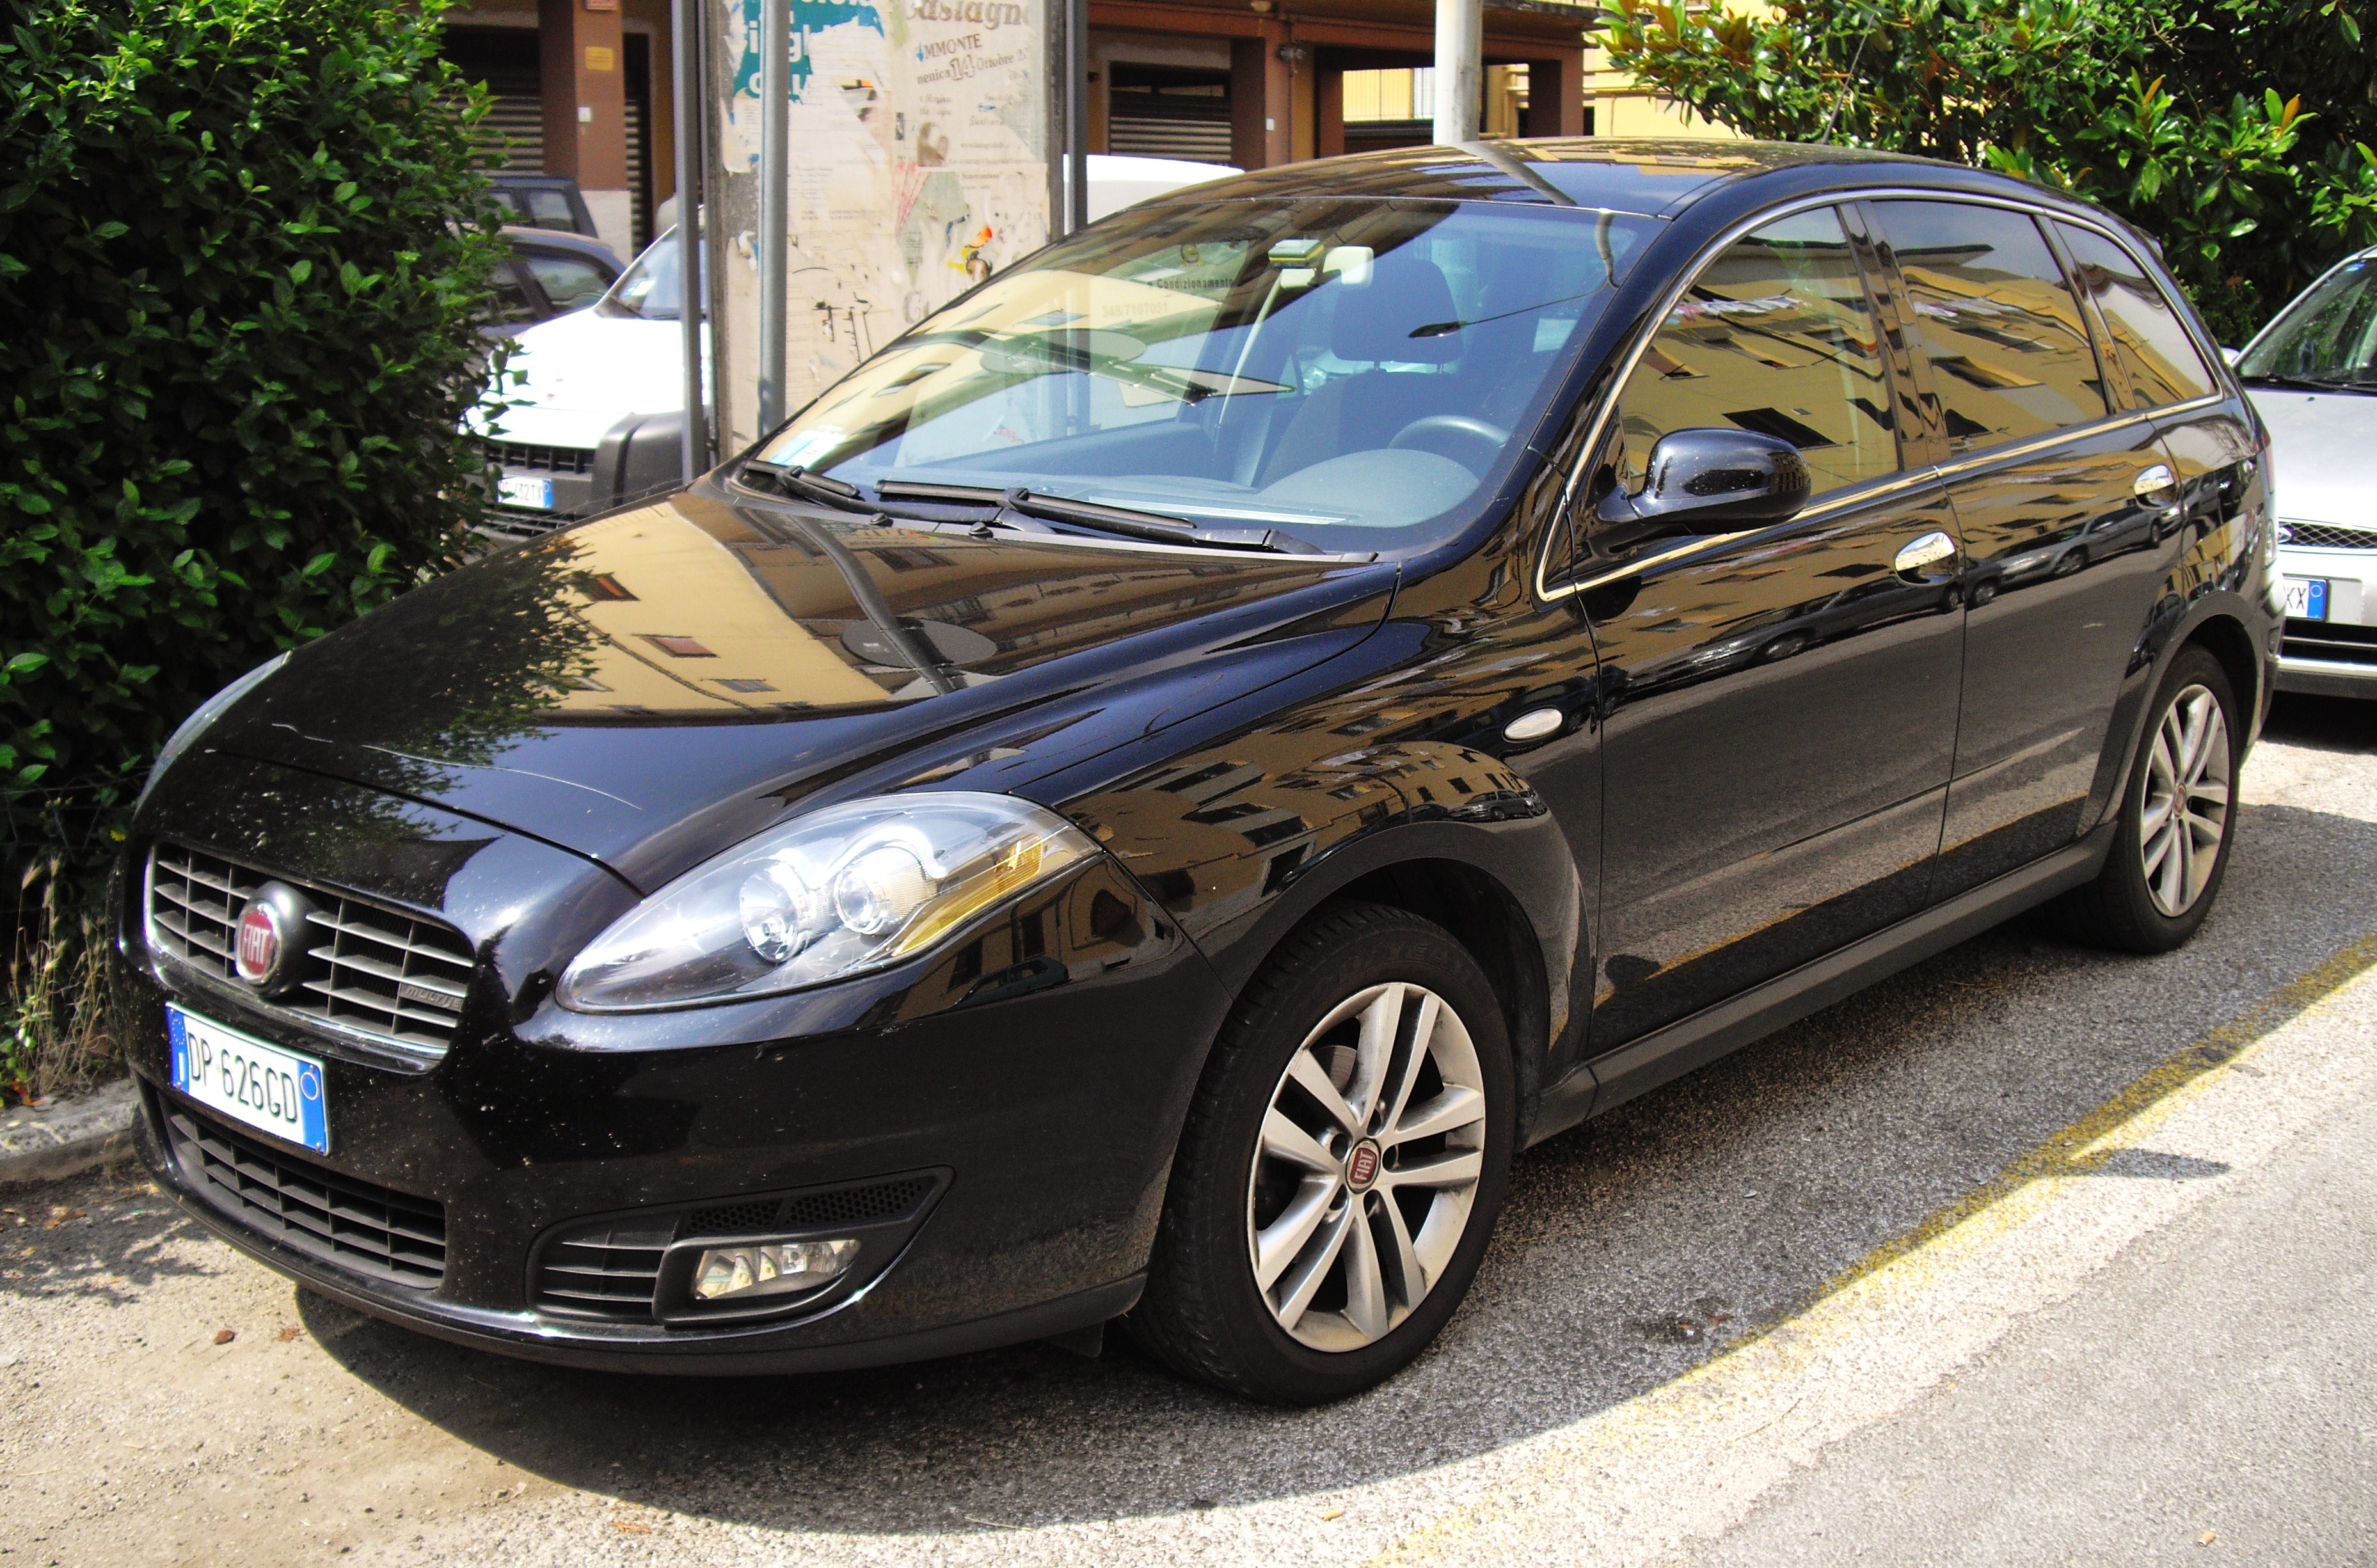 Fiat Croma 2010 Review, Amazing Pictures and Images